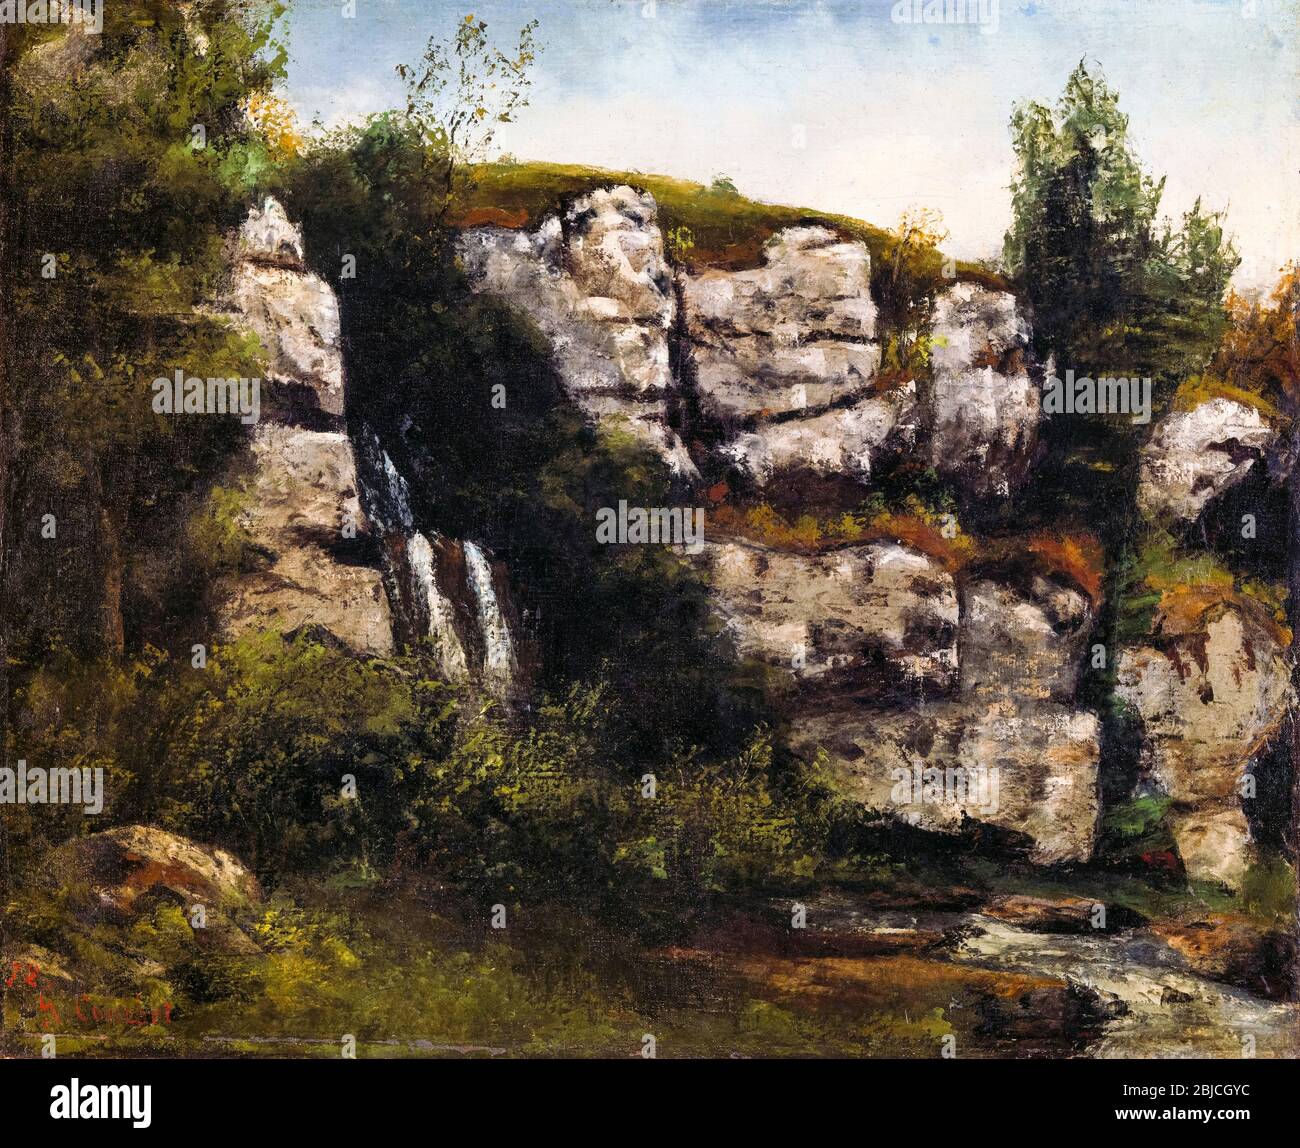 Gustave Courbet, Landscape with Rocky Cliffs and a Waterfall, painting, 1872 Stock Photo